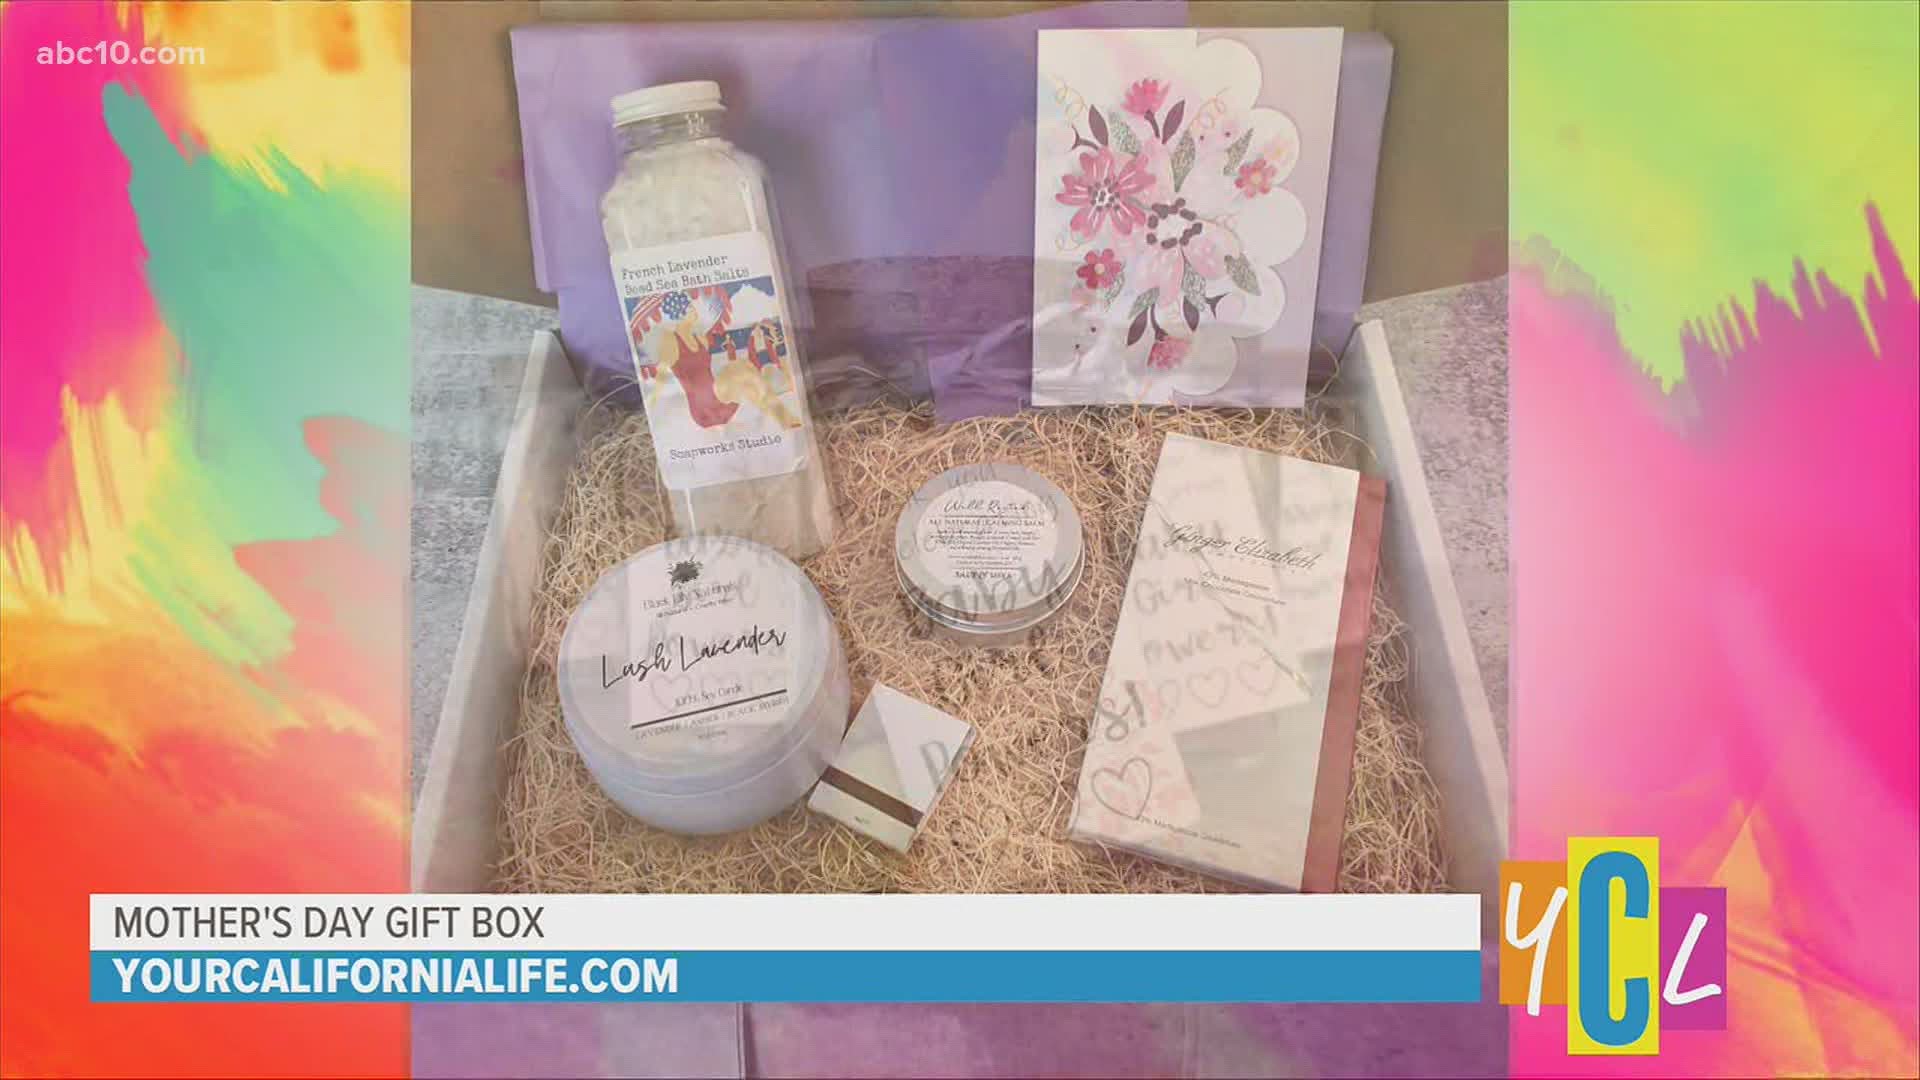 Simply Special Sac's Spring Box is perfect for Mother's Day with a theme of "Rest and Relaxation," and it's items are from local, women-owned small businesses.